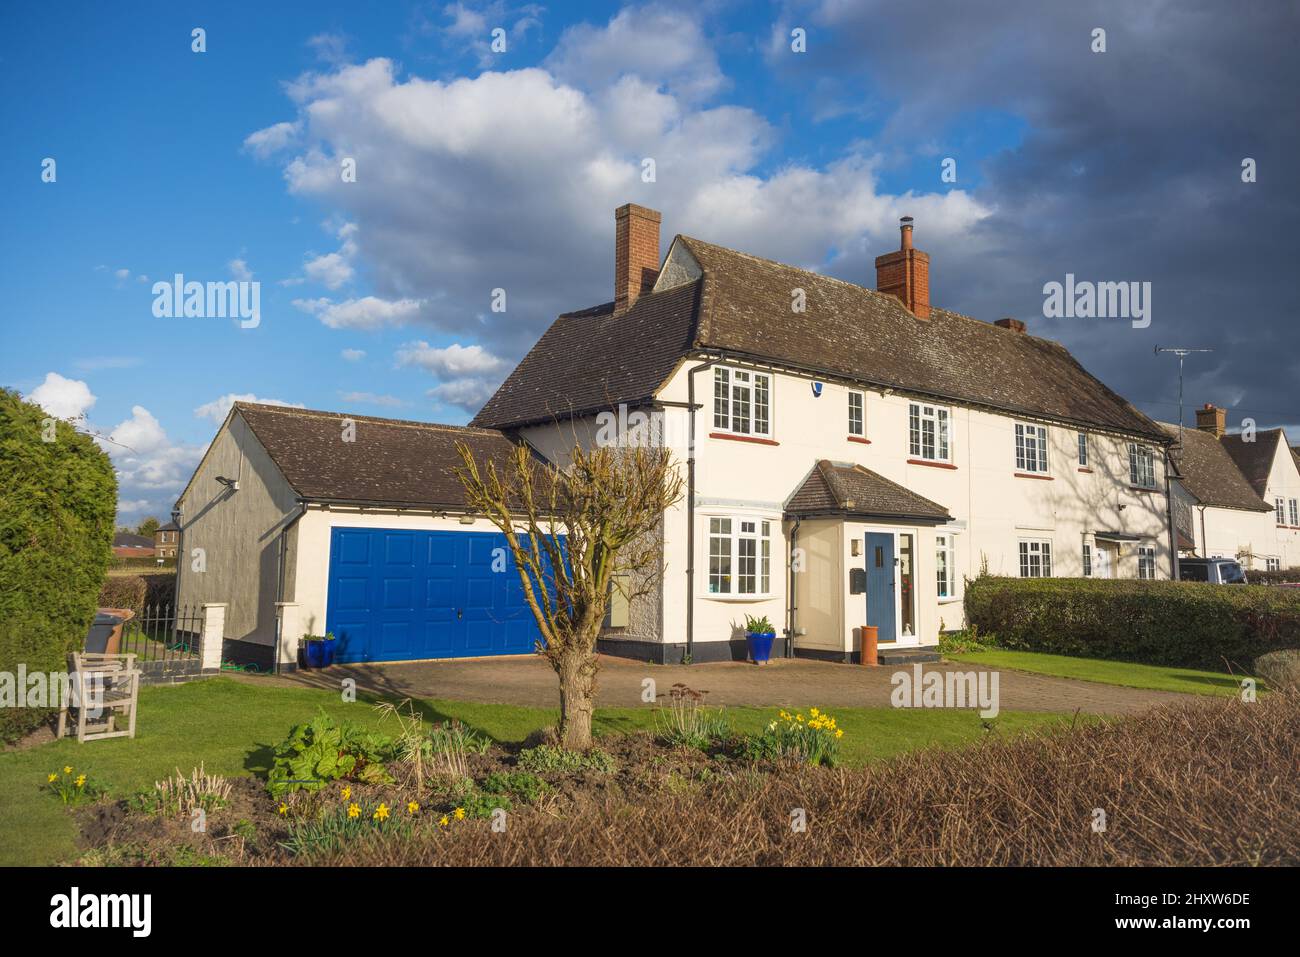 Exterior of a 1920's semi-detached former council house with added porch, double garage and driveway. Hertfordshire. UK Stock Photo